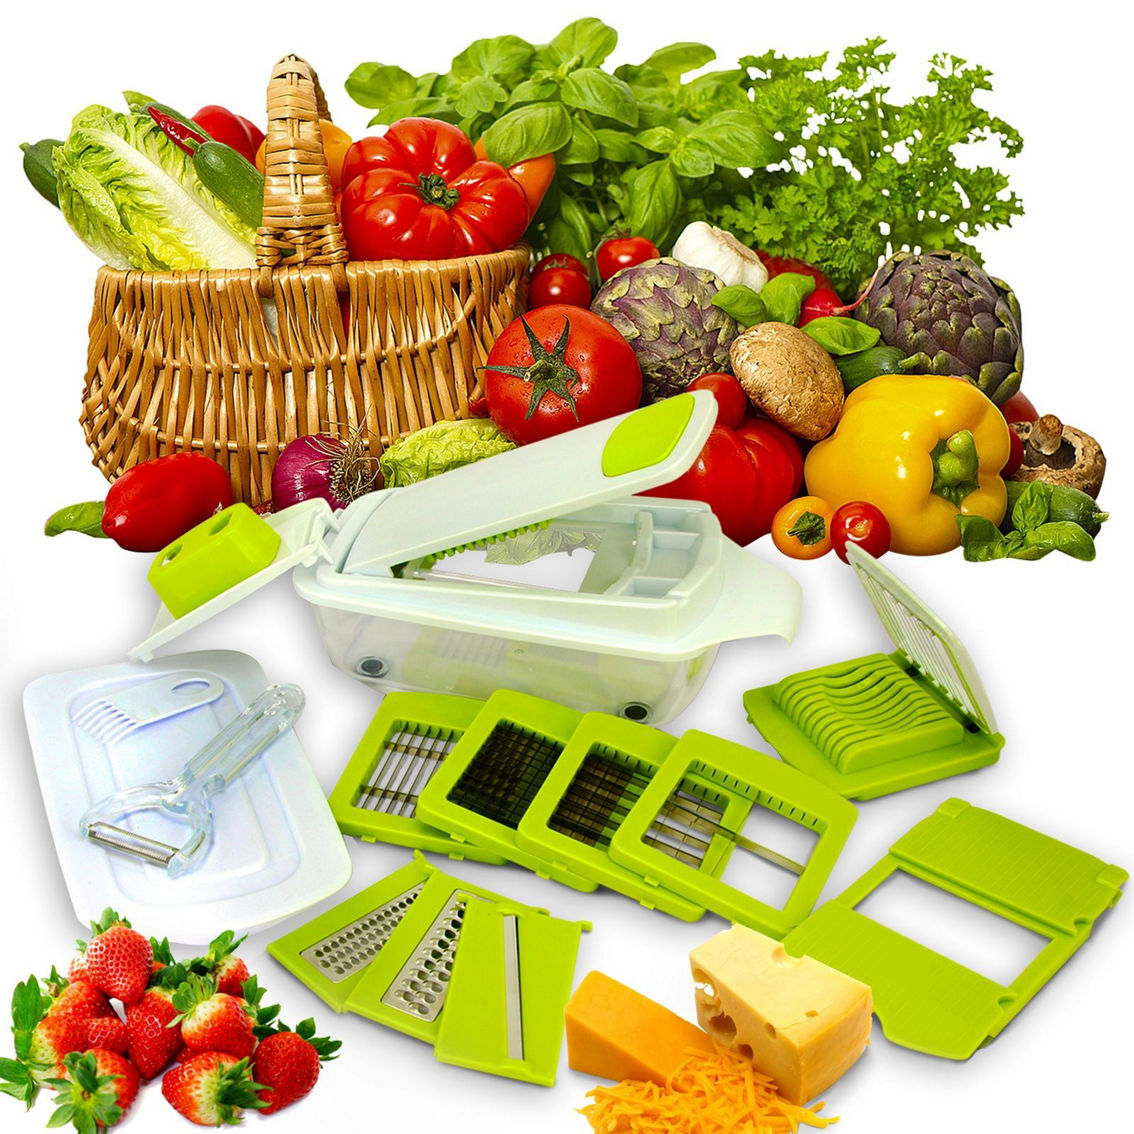 MegaChef 8-in-1 Multi-Use Slicer Dicer and Chopper with Interchangeable Blades - Image 3 of 5